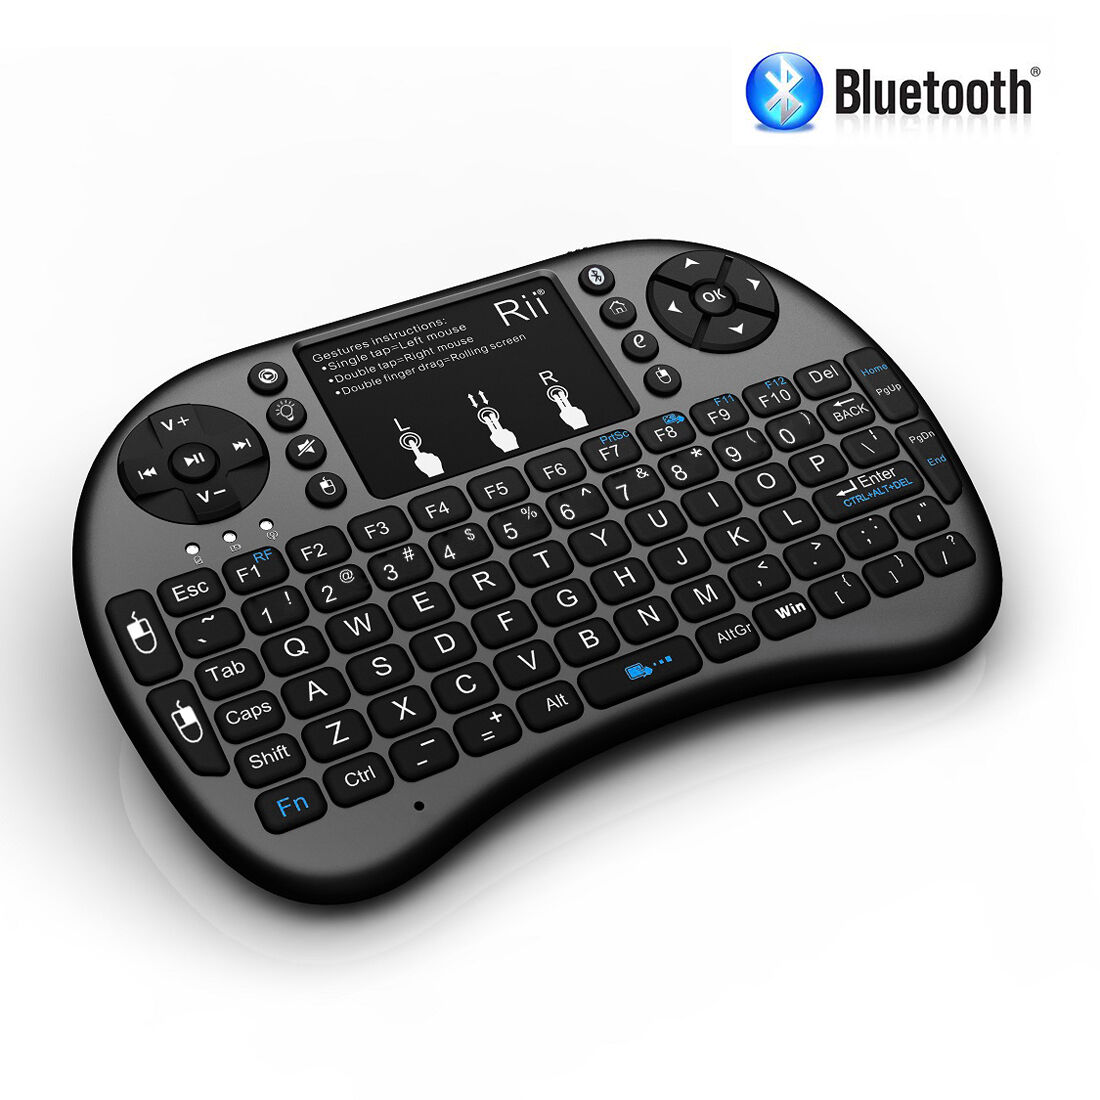 NEW Rii i8+ Mini Bluetooth Keyboard Backlight, Touchpad w Mouse + Charger